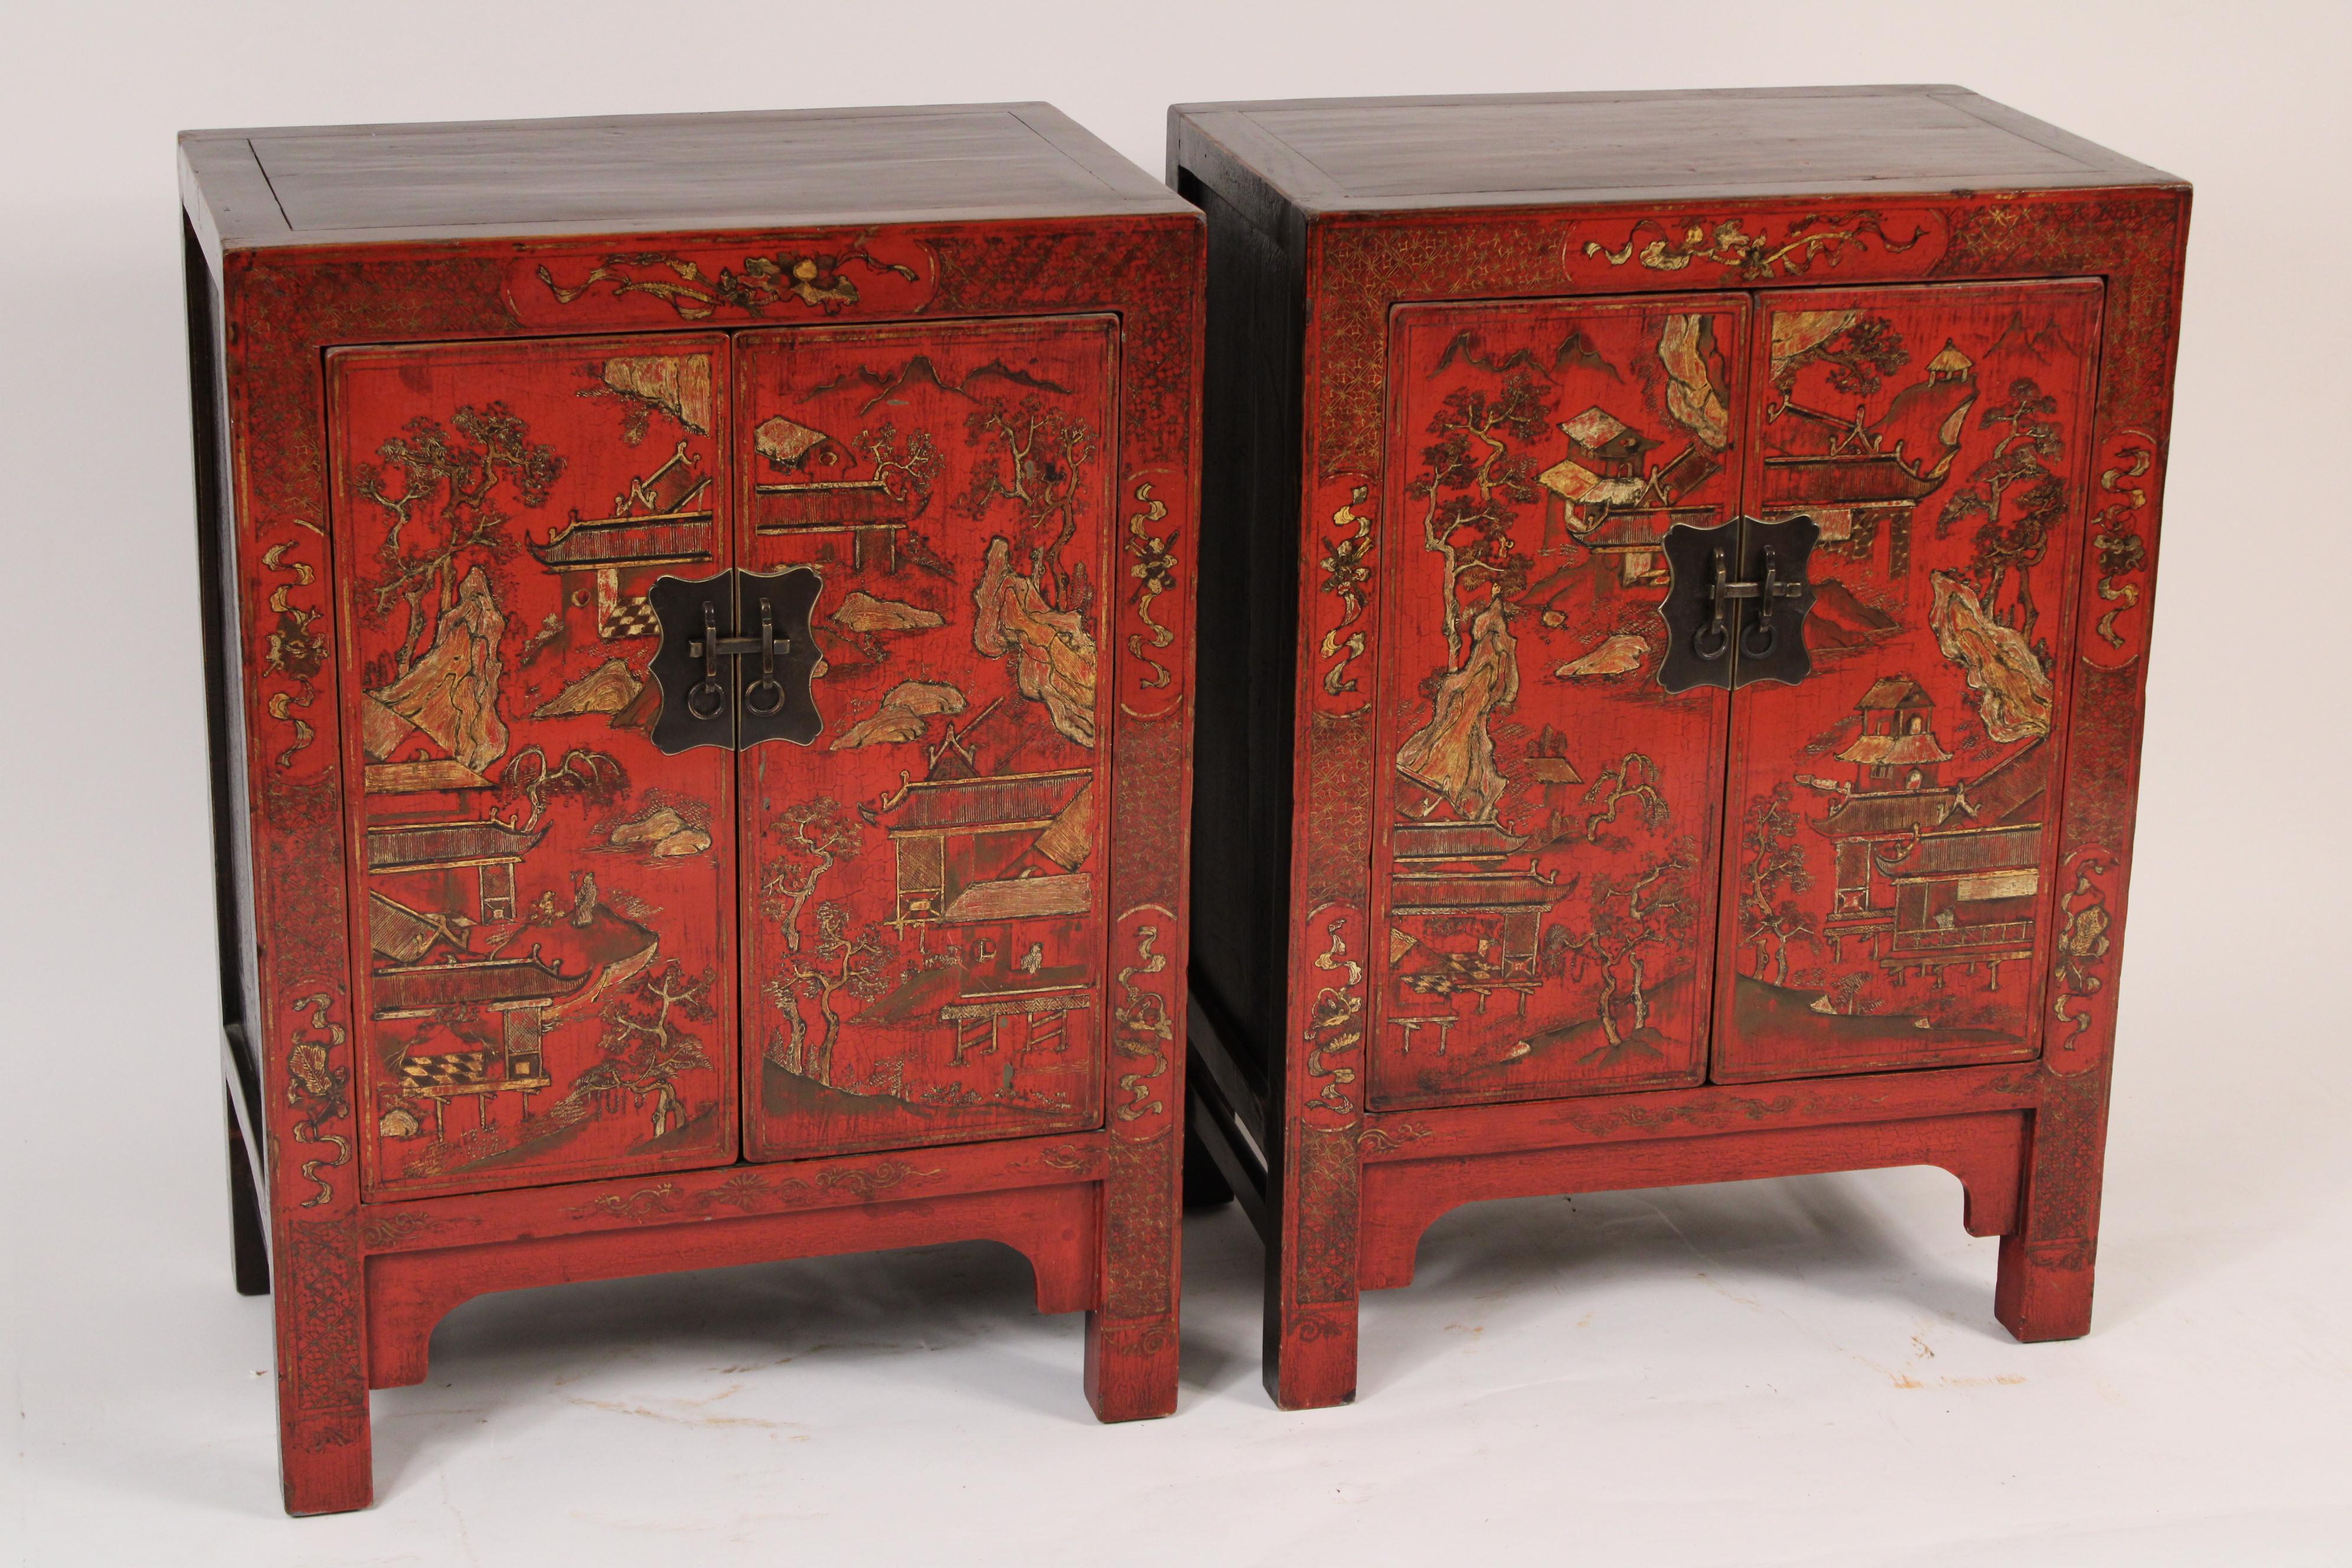 Pair of Chinese red lacquer and gilt decorated two door occasional cabinets, circa mid 20th century. Add a little color to your bedroom with this pair of nightstands or living room with this pair red and gilt decorated Chinese cabinets.